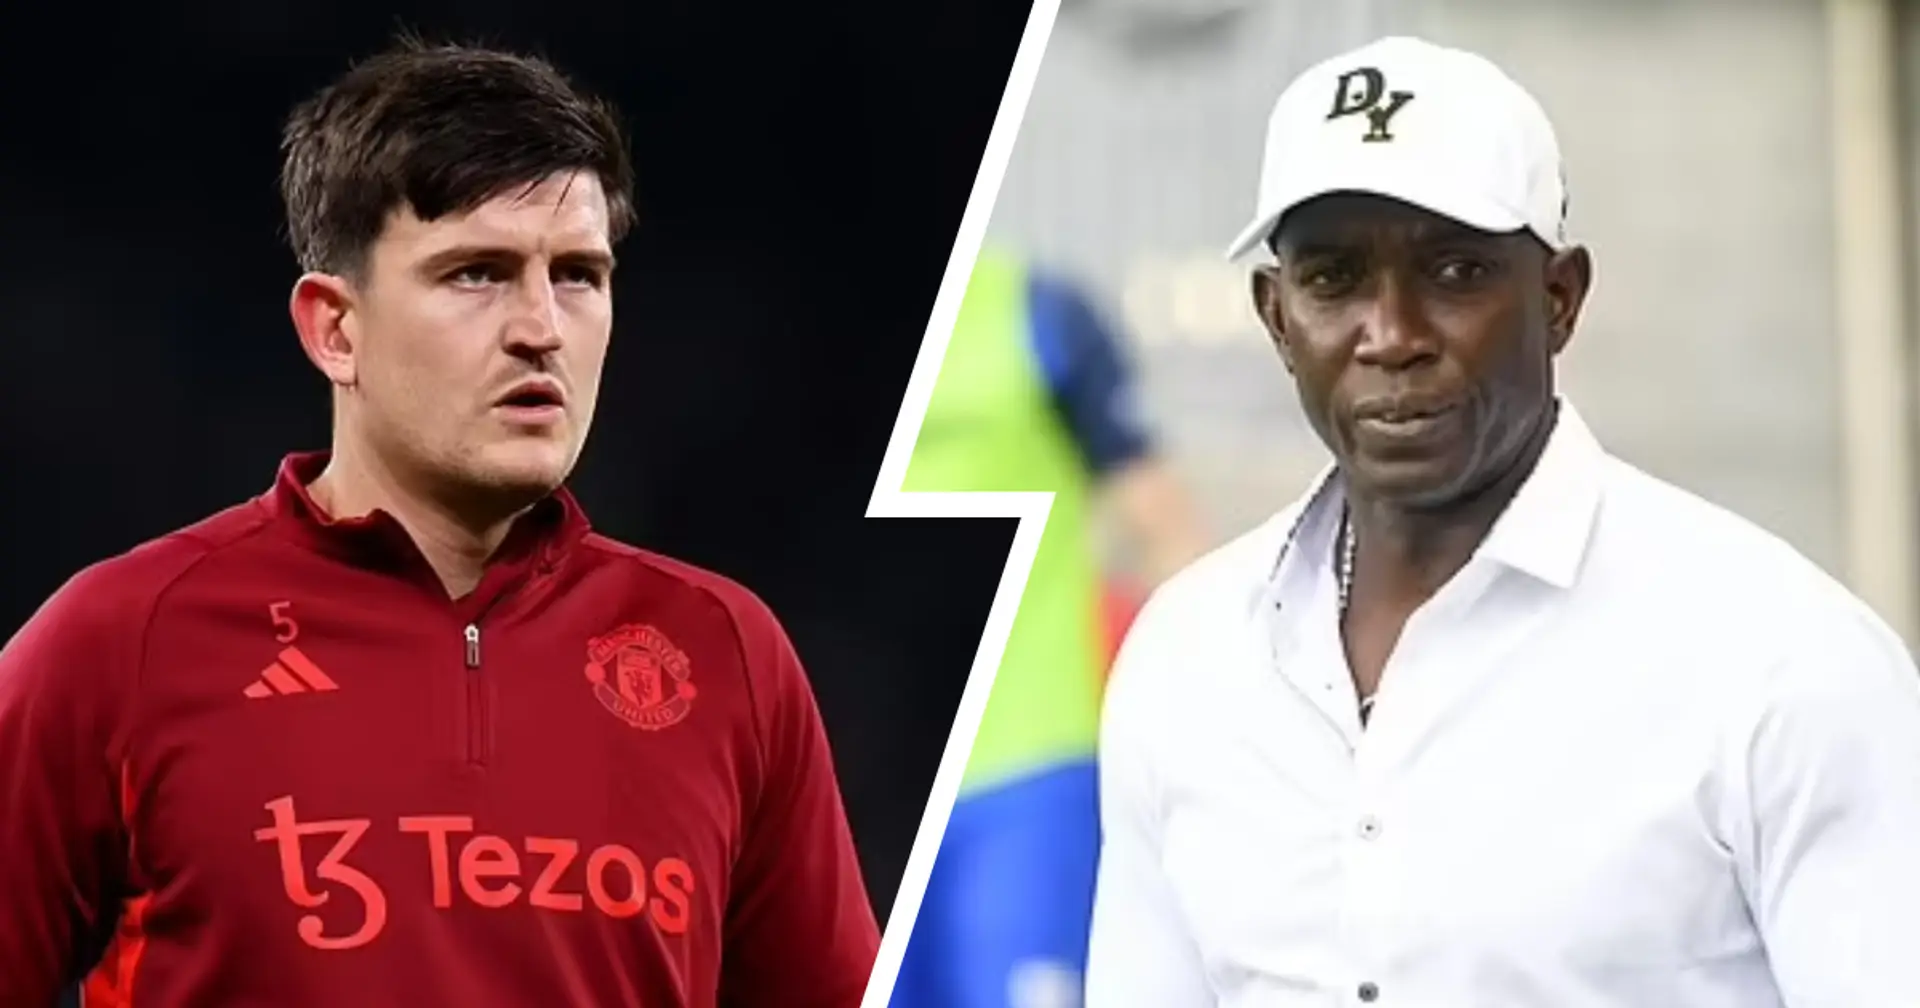 'People were calling for his head': Dwight Yorke praises Harry Maguire's resilience 